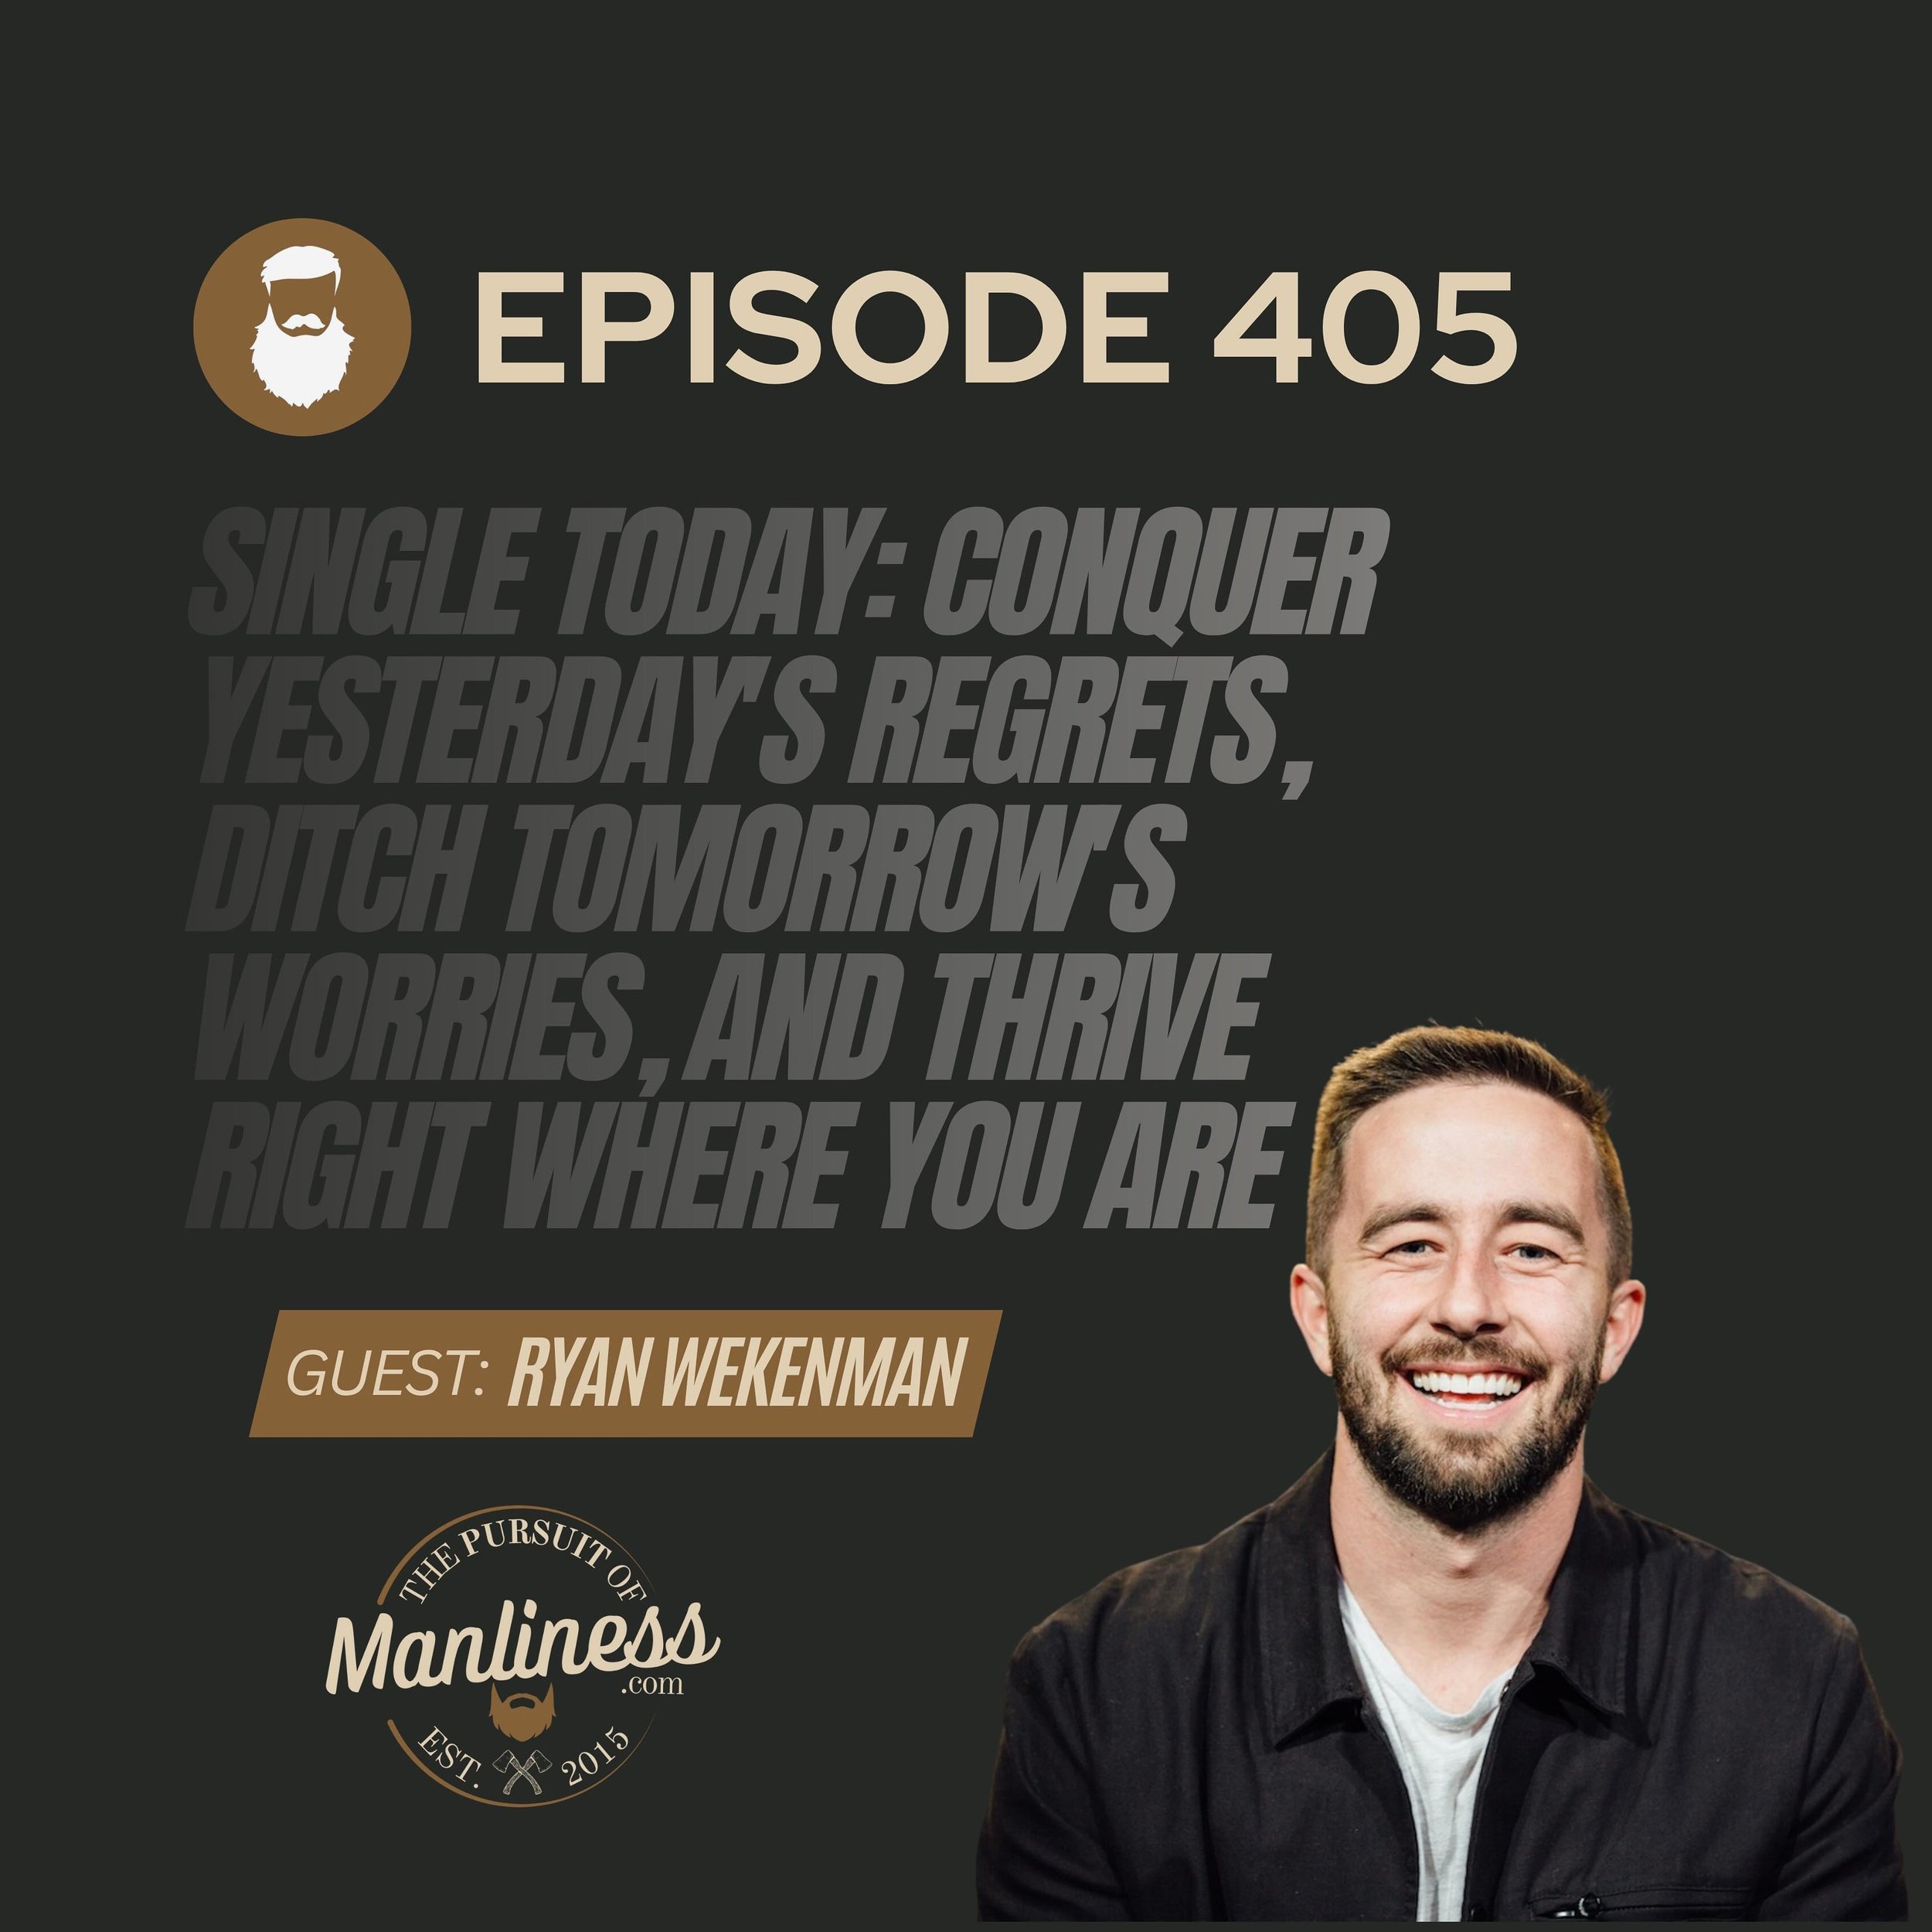 Episode 405 went live today. On today&rsquo;s podcast episode I sat down with Ryan Wekenman pastor of Red Rocks Church in Austin Texas and author of &ldquo;Single Today, Conquer Yesterday&rsquo;s Regrets, Ditch Tomorrow&rsquo;s Worries, and Thrive Ri